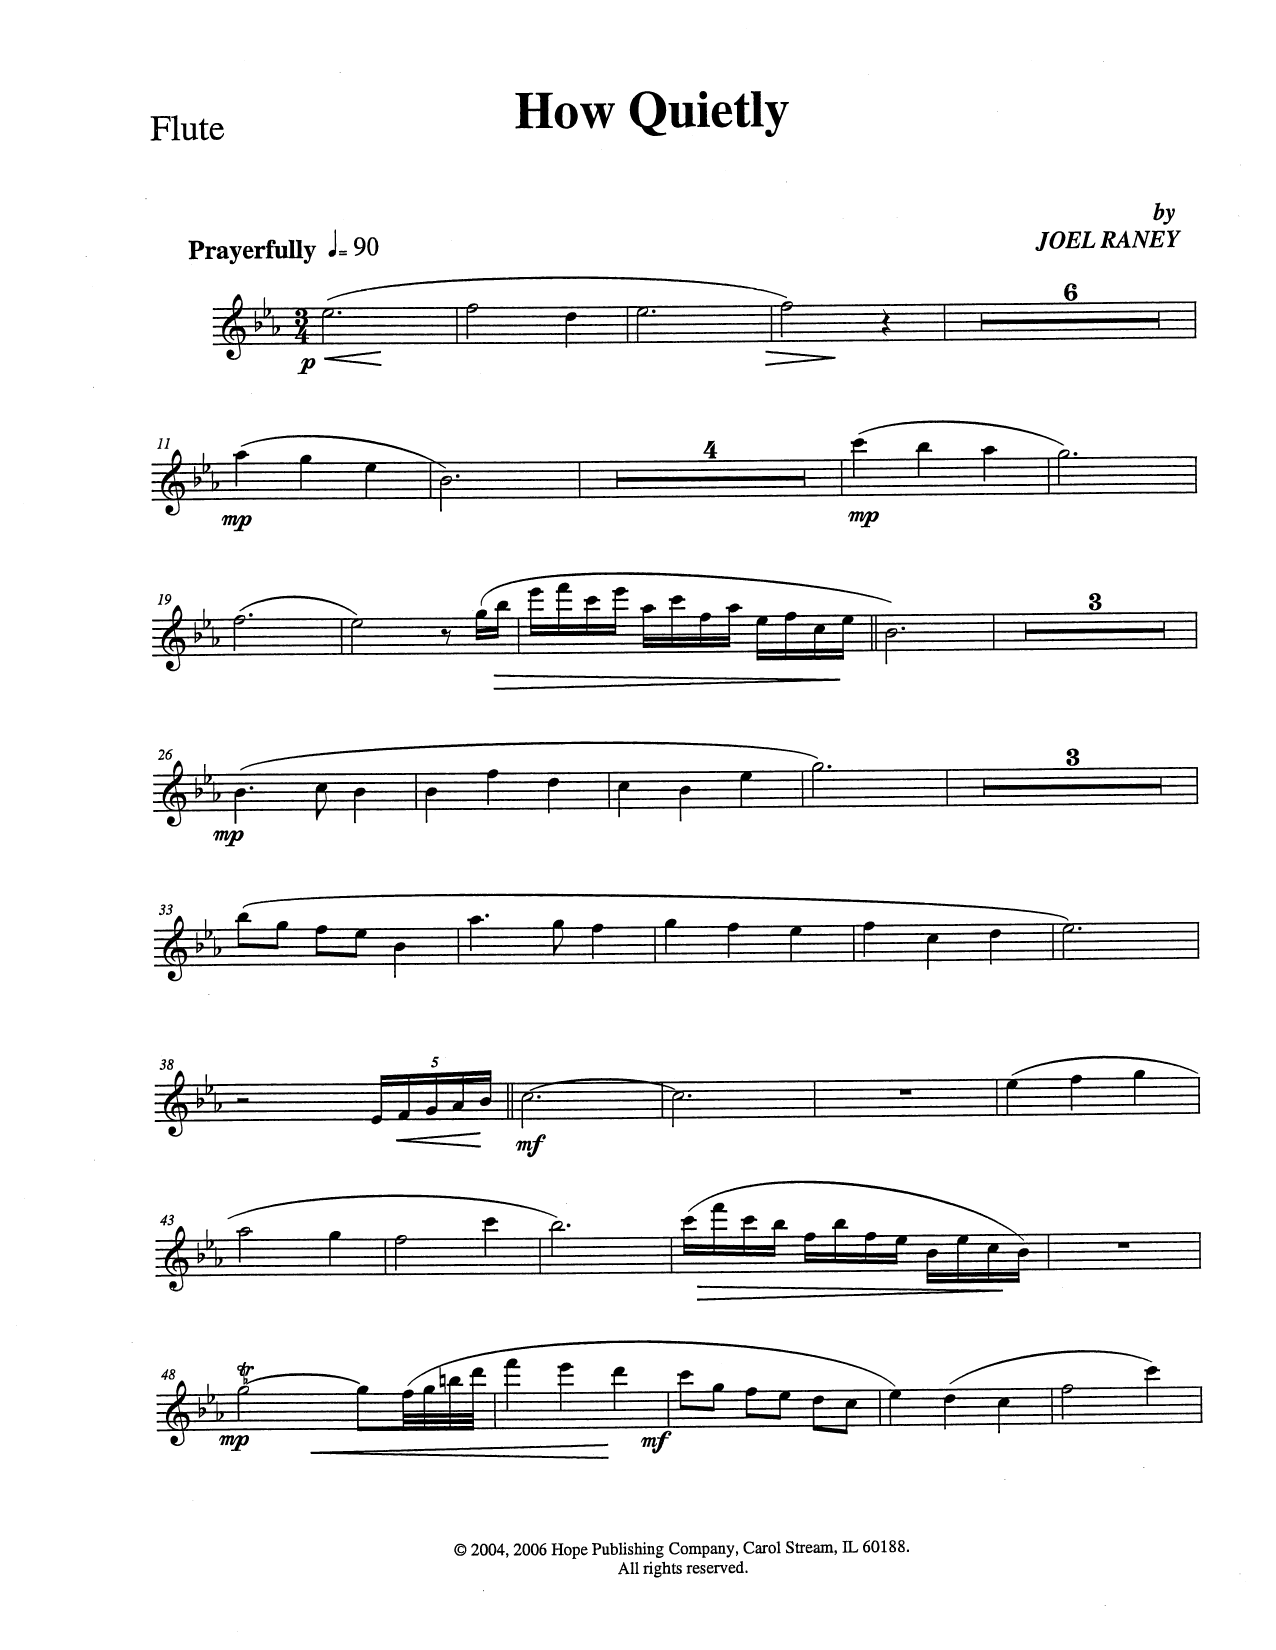 Download Joel Raney How Quietly - Flute Sheet Music